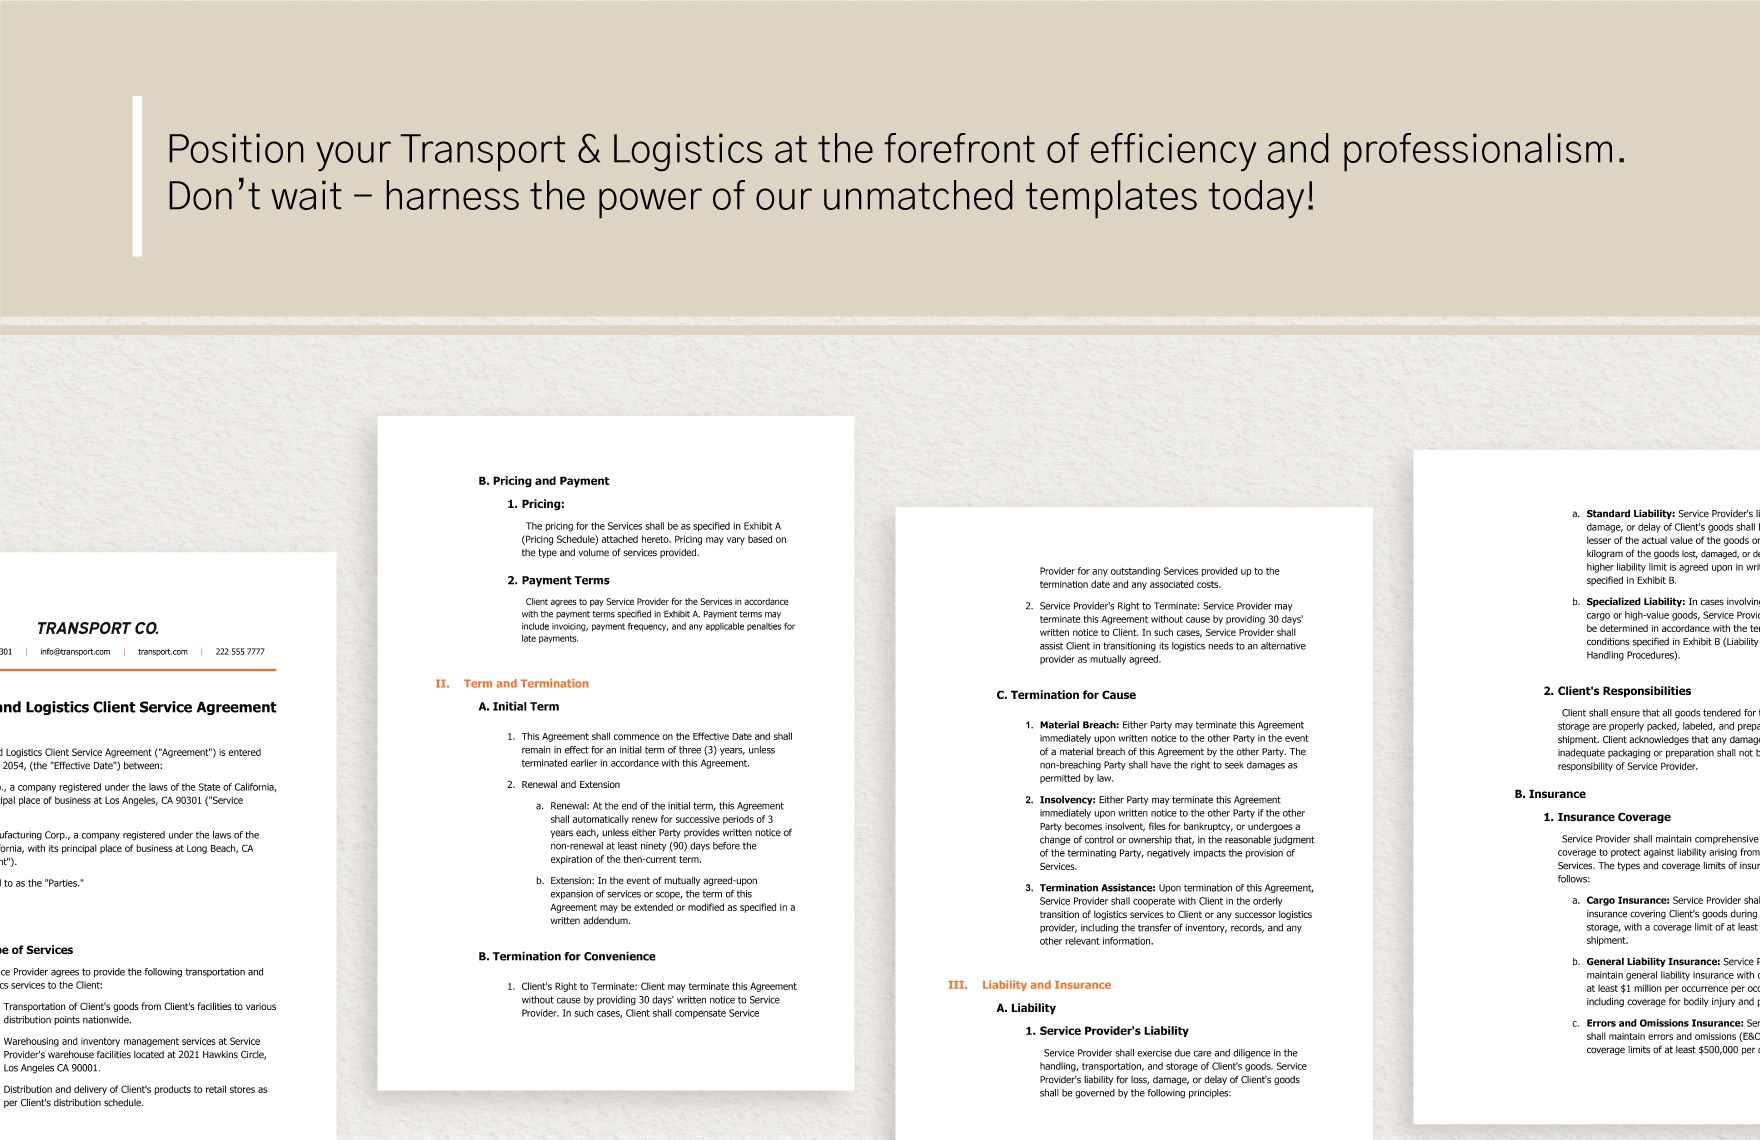 Transport and Logistics Client Service Agreement Template